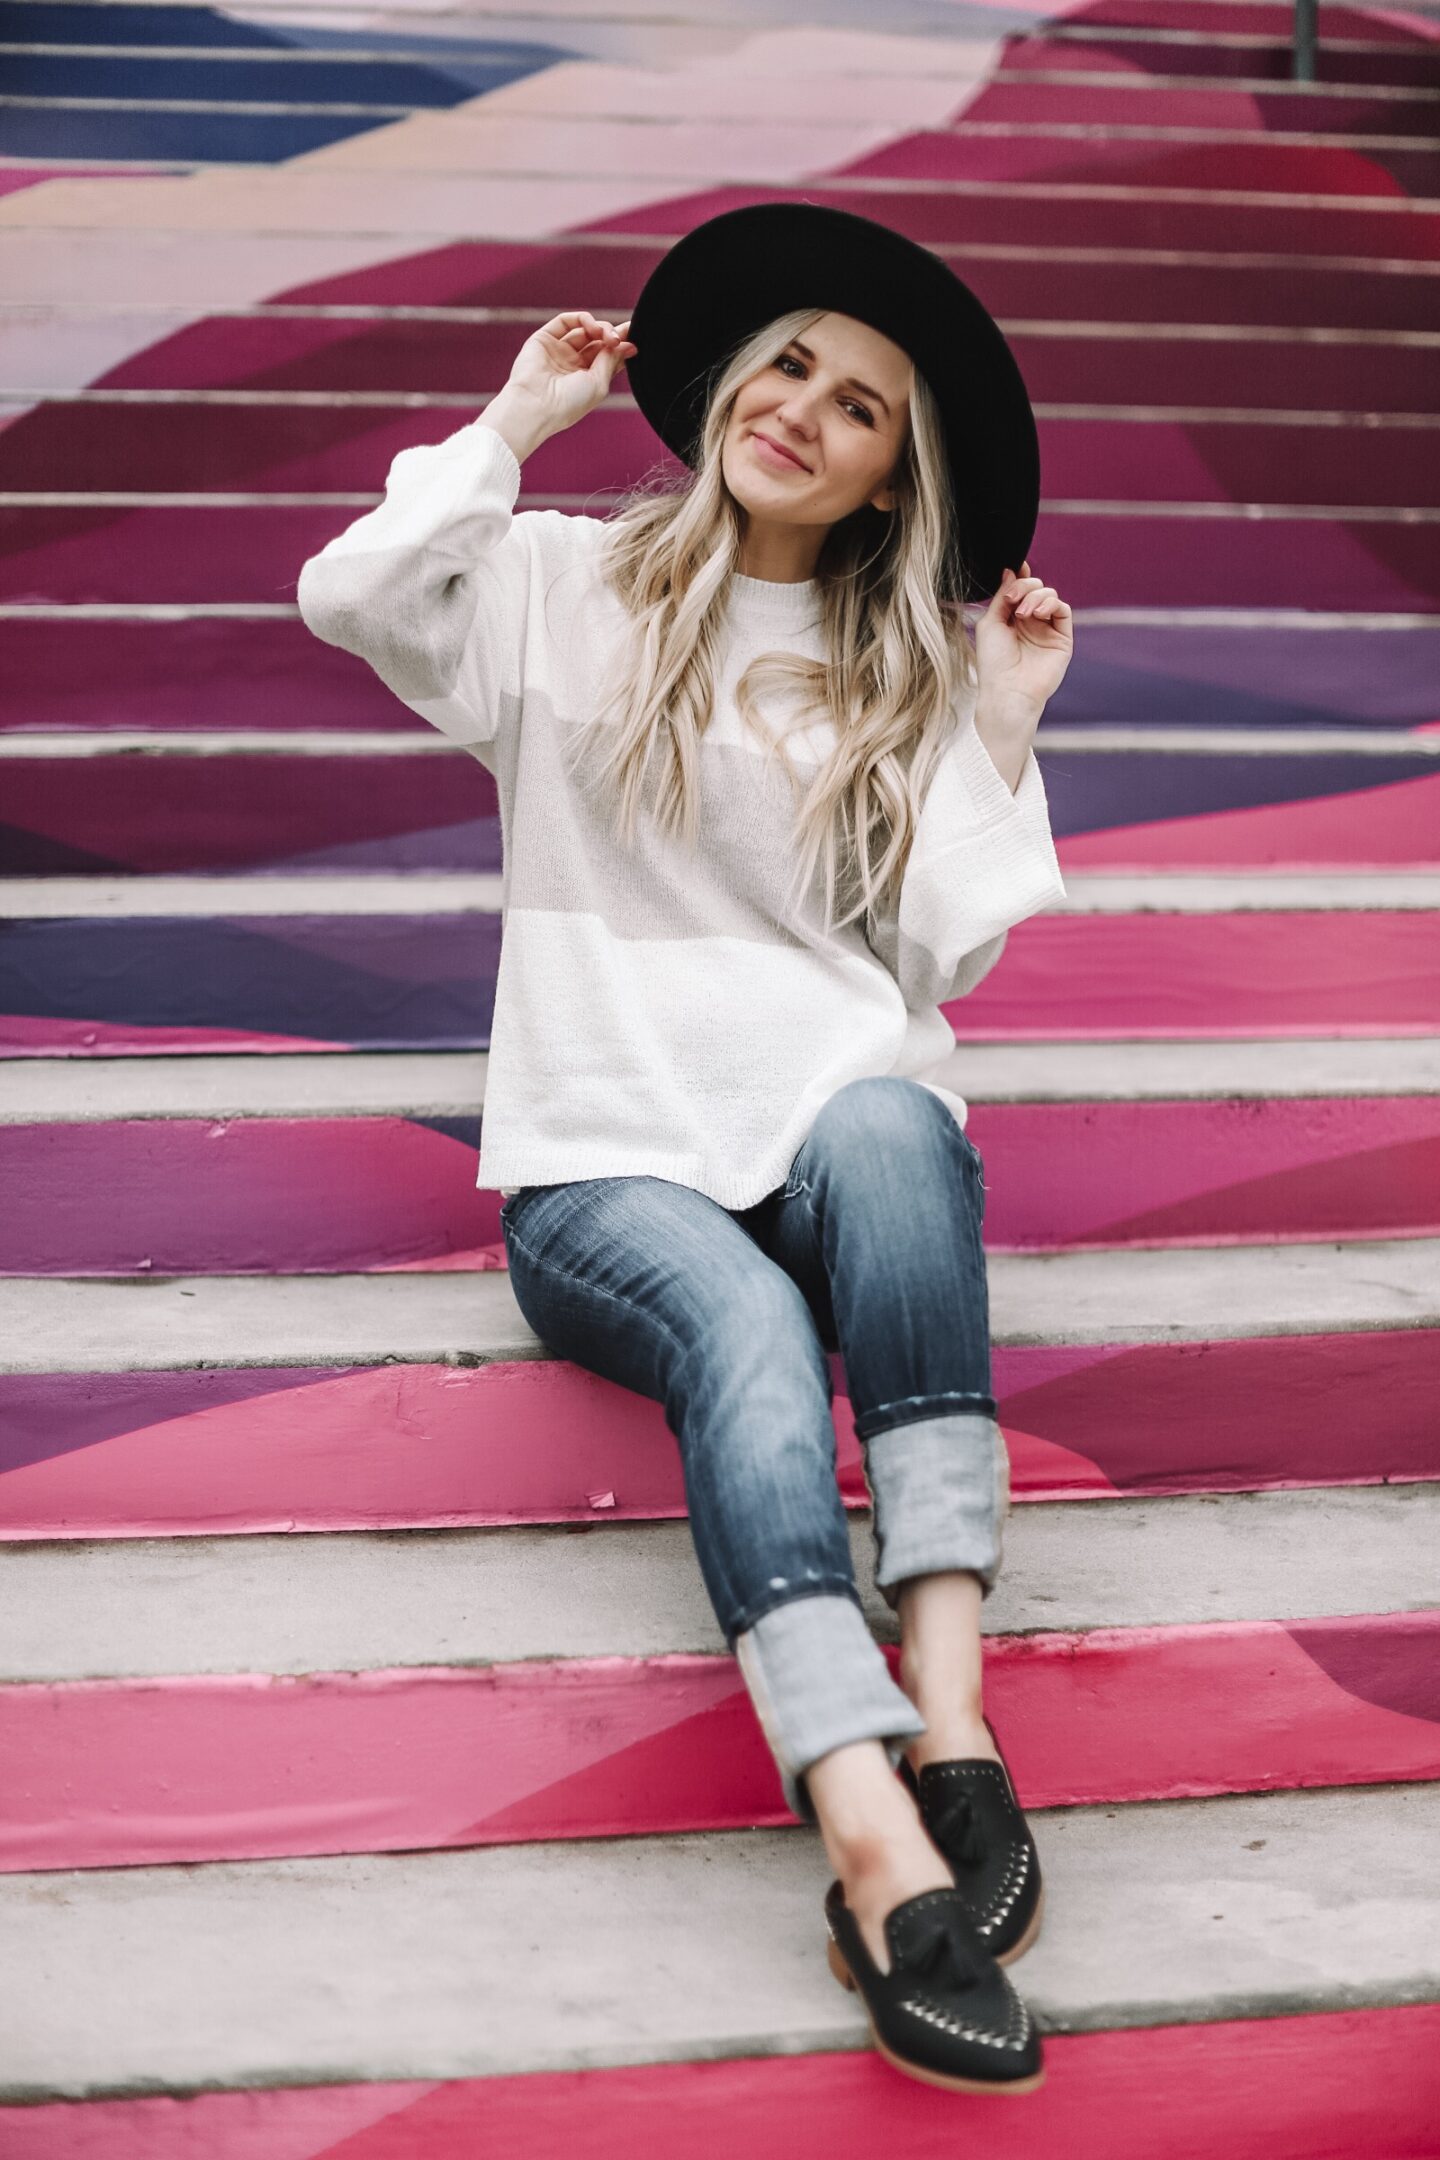 pink stairs + last minute Valentine’s Day gift ideas